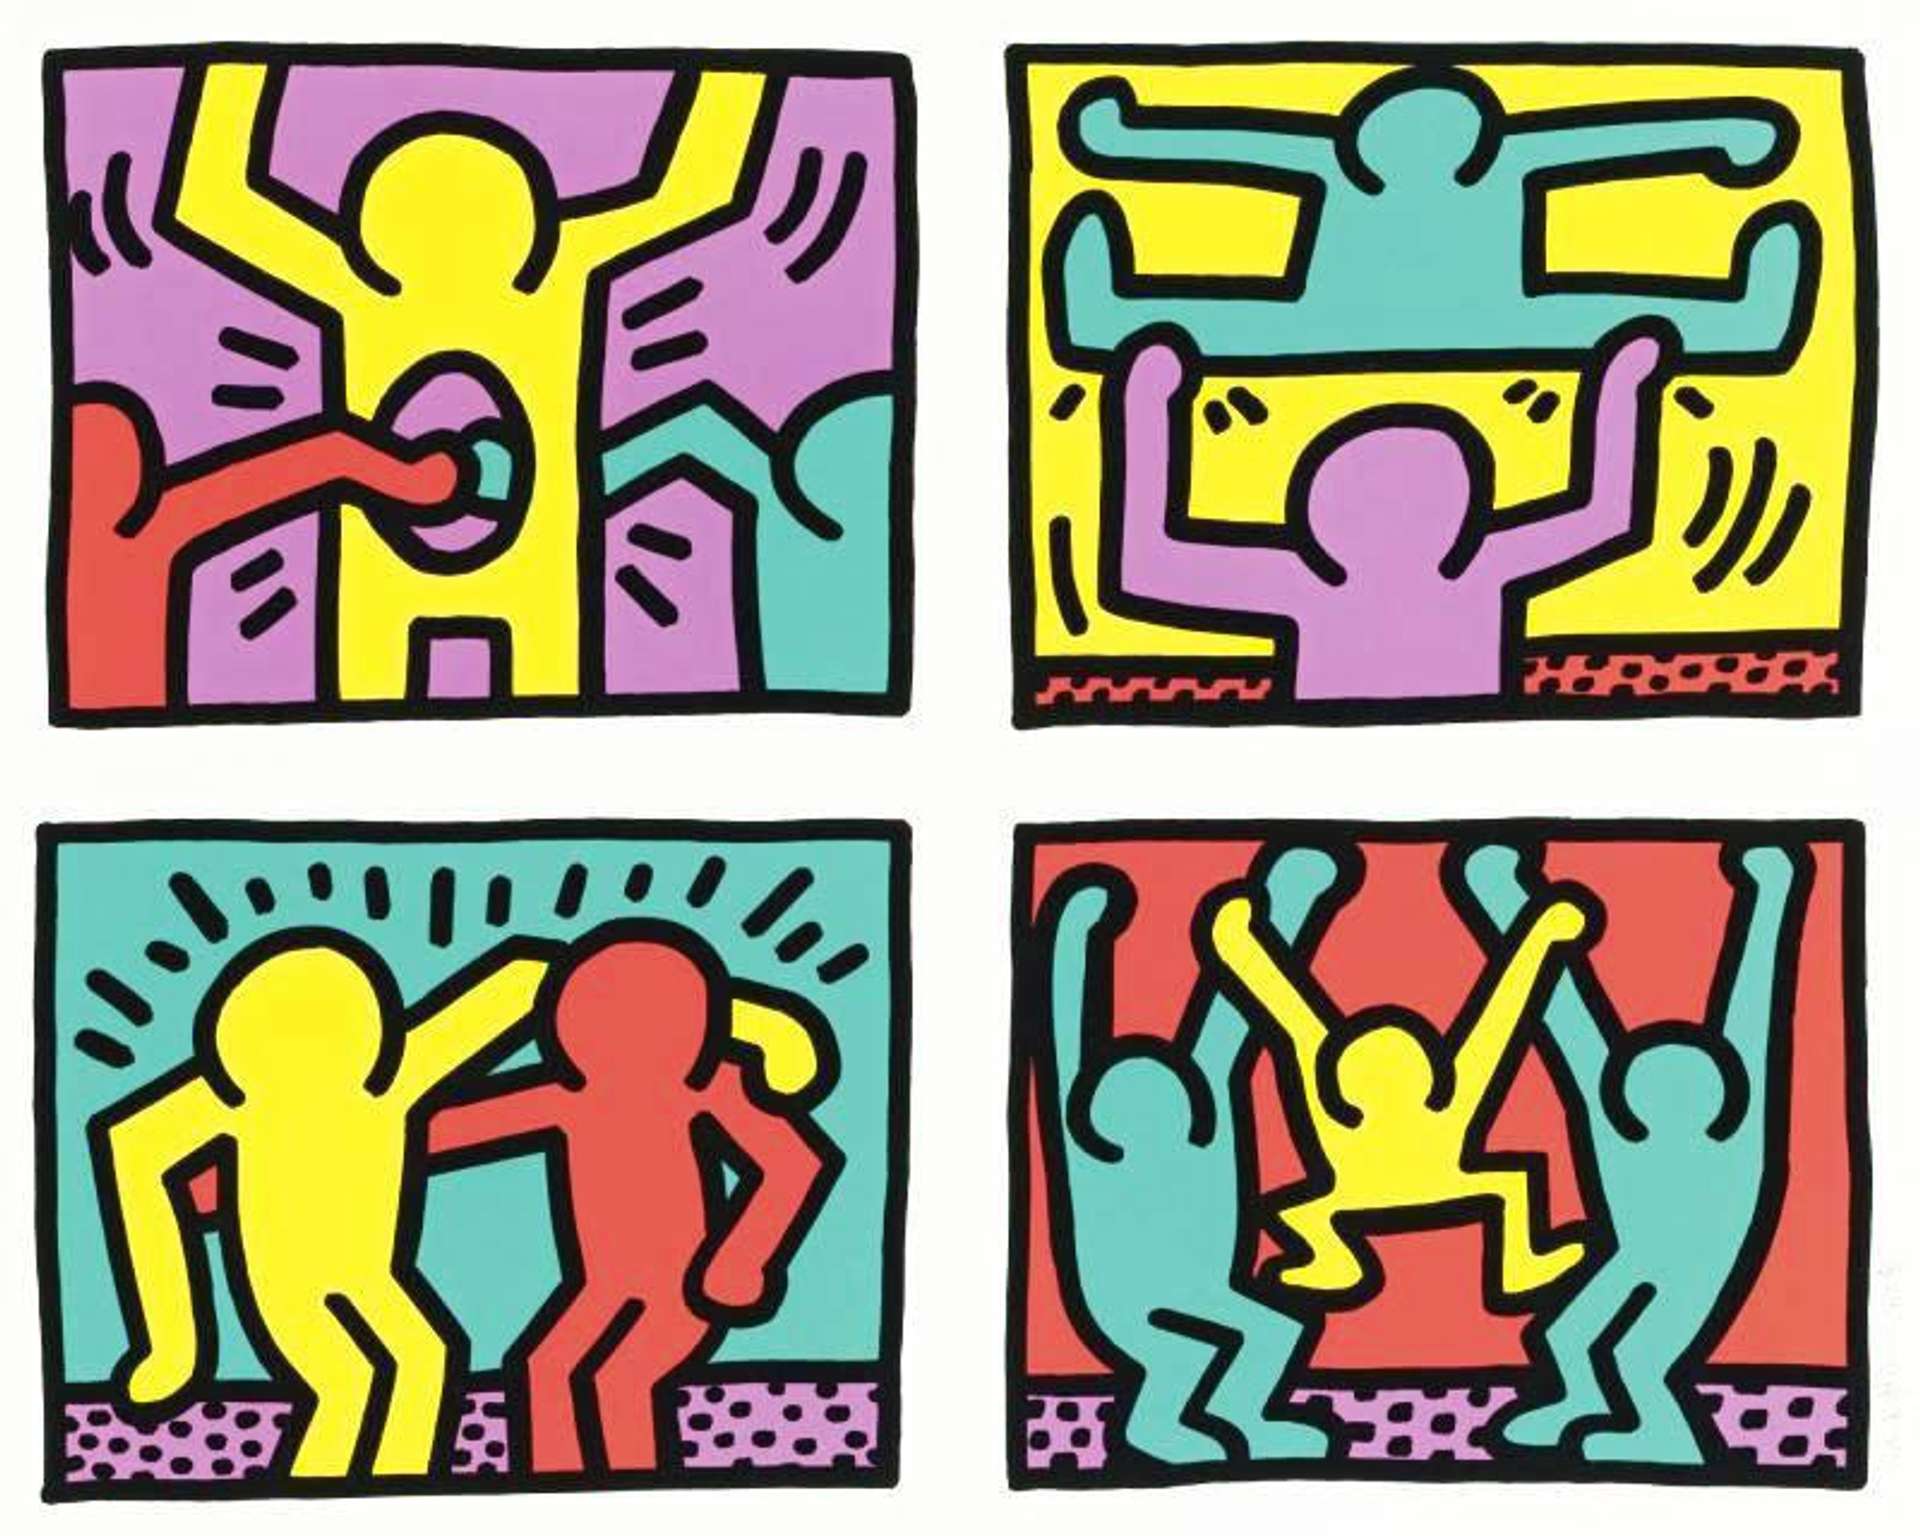 Four brightly coloured prints from Keith Haring's Pop Shop series. Each print depicts simply outlined figures hugging, dancing and jumping against a block colour background.